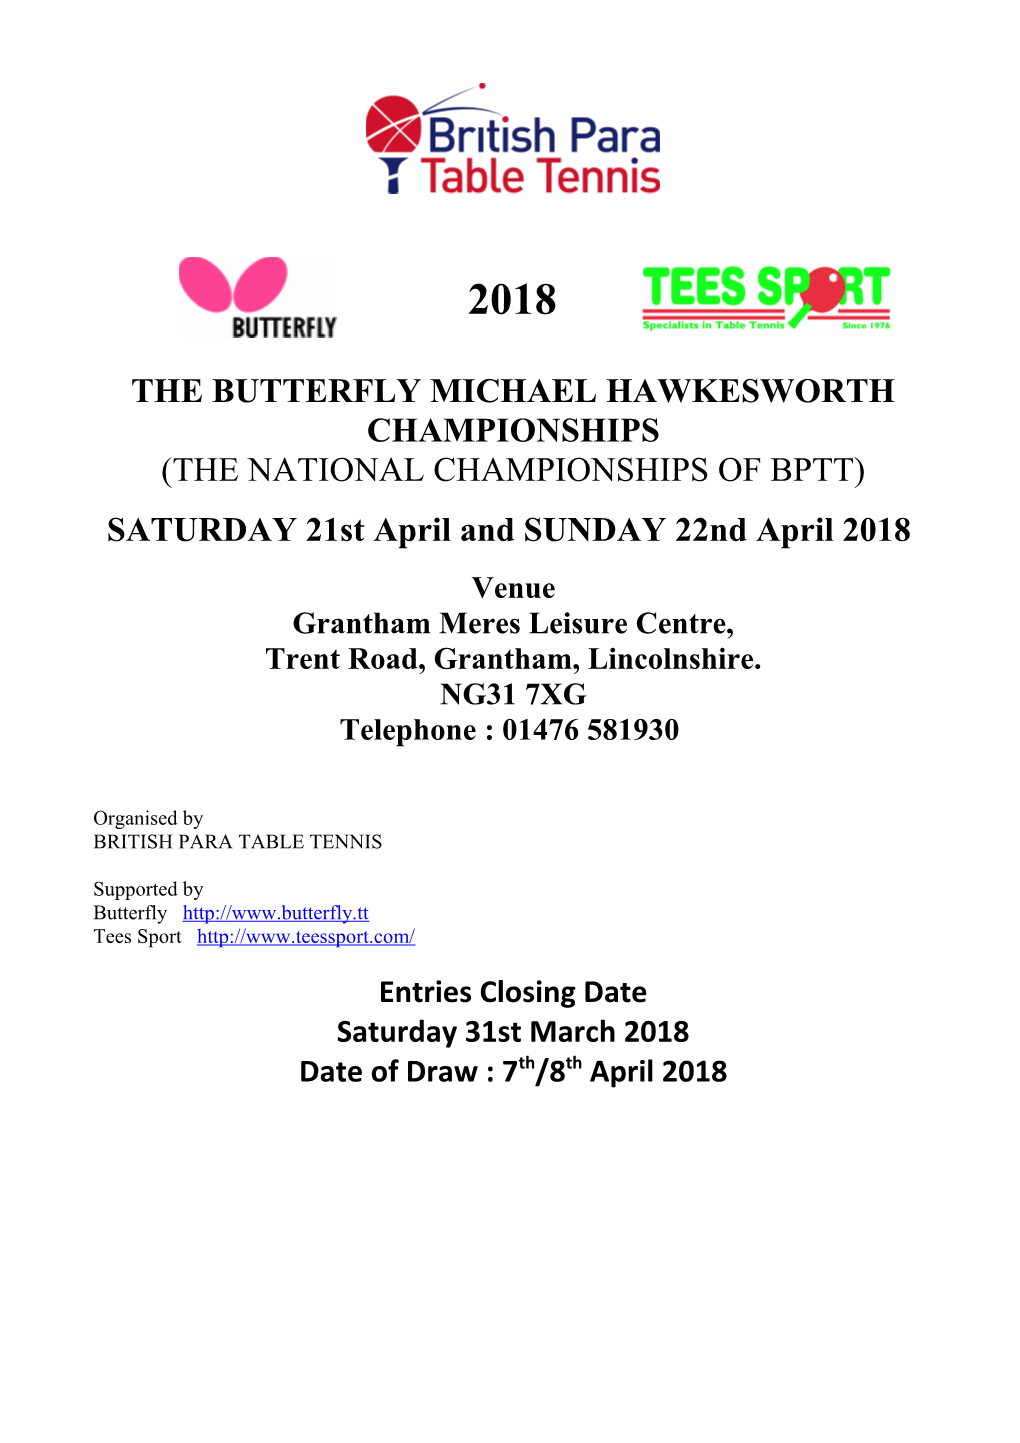 The Butterfly Michael Hawkesworth Championships